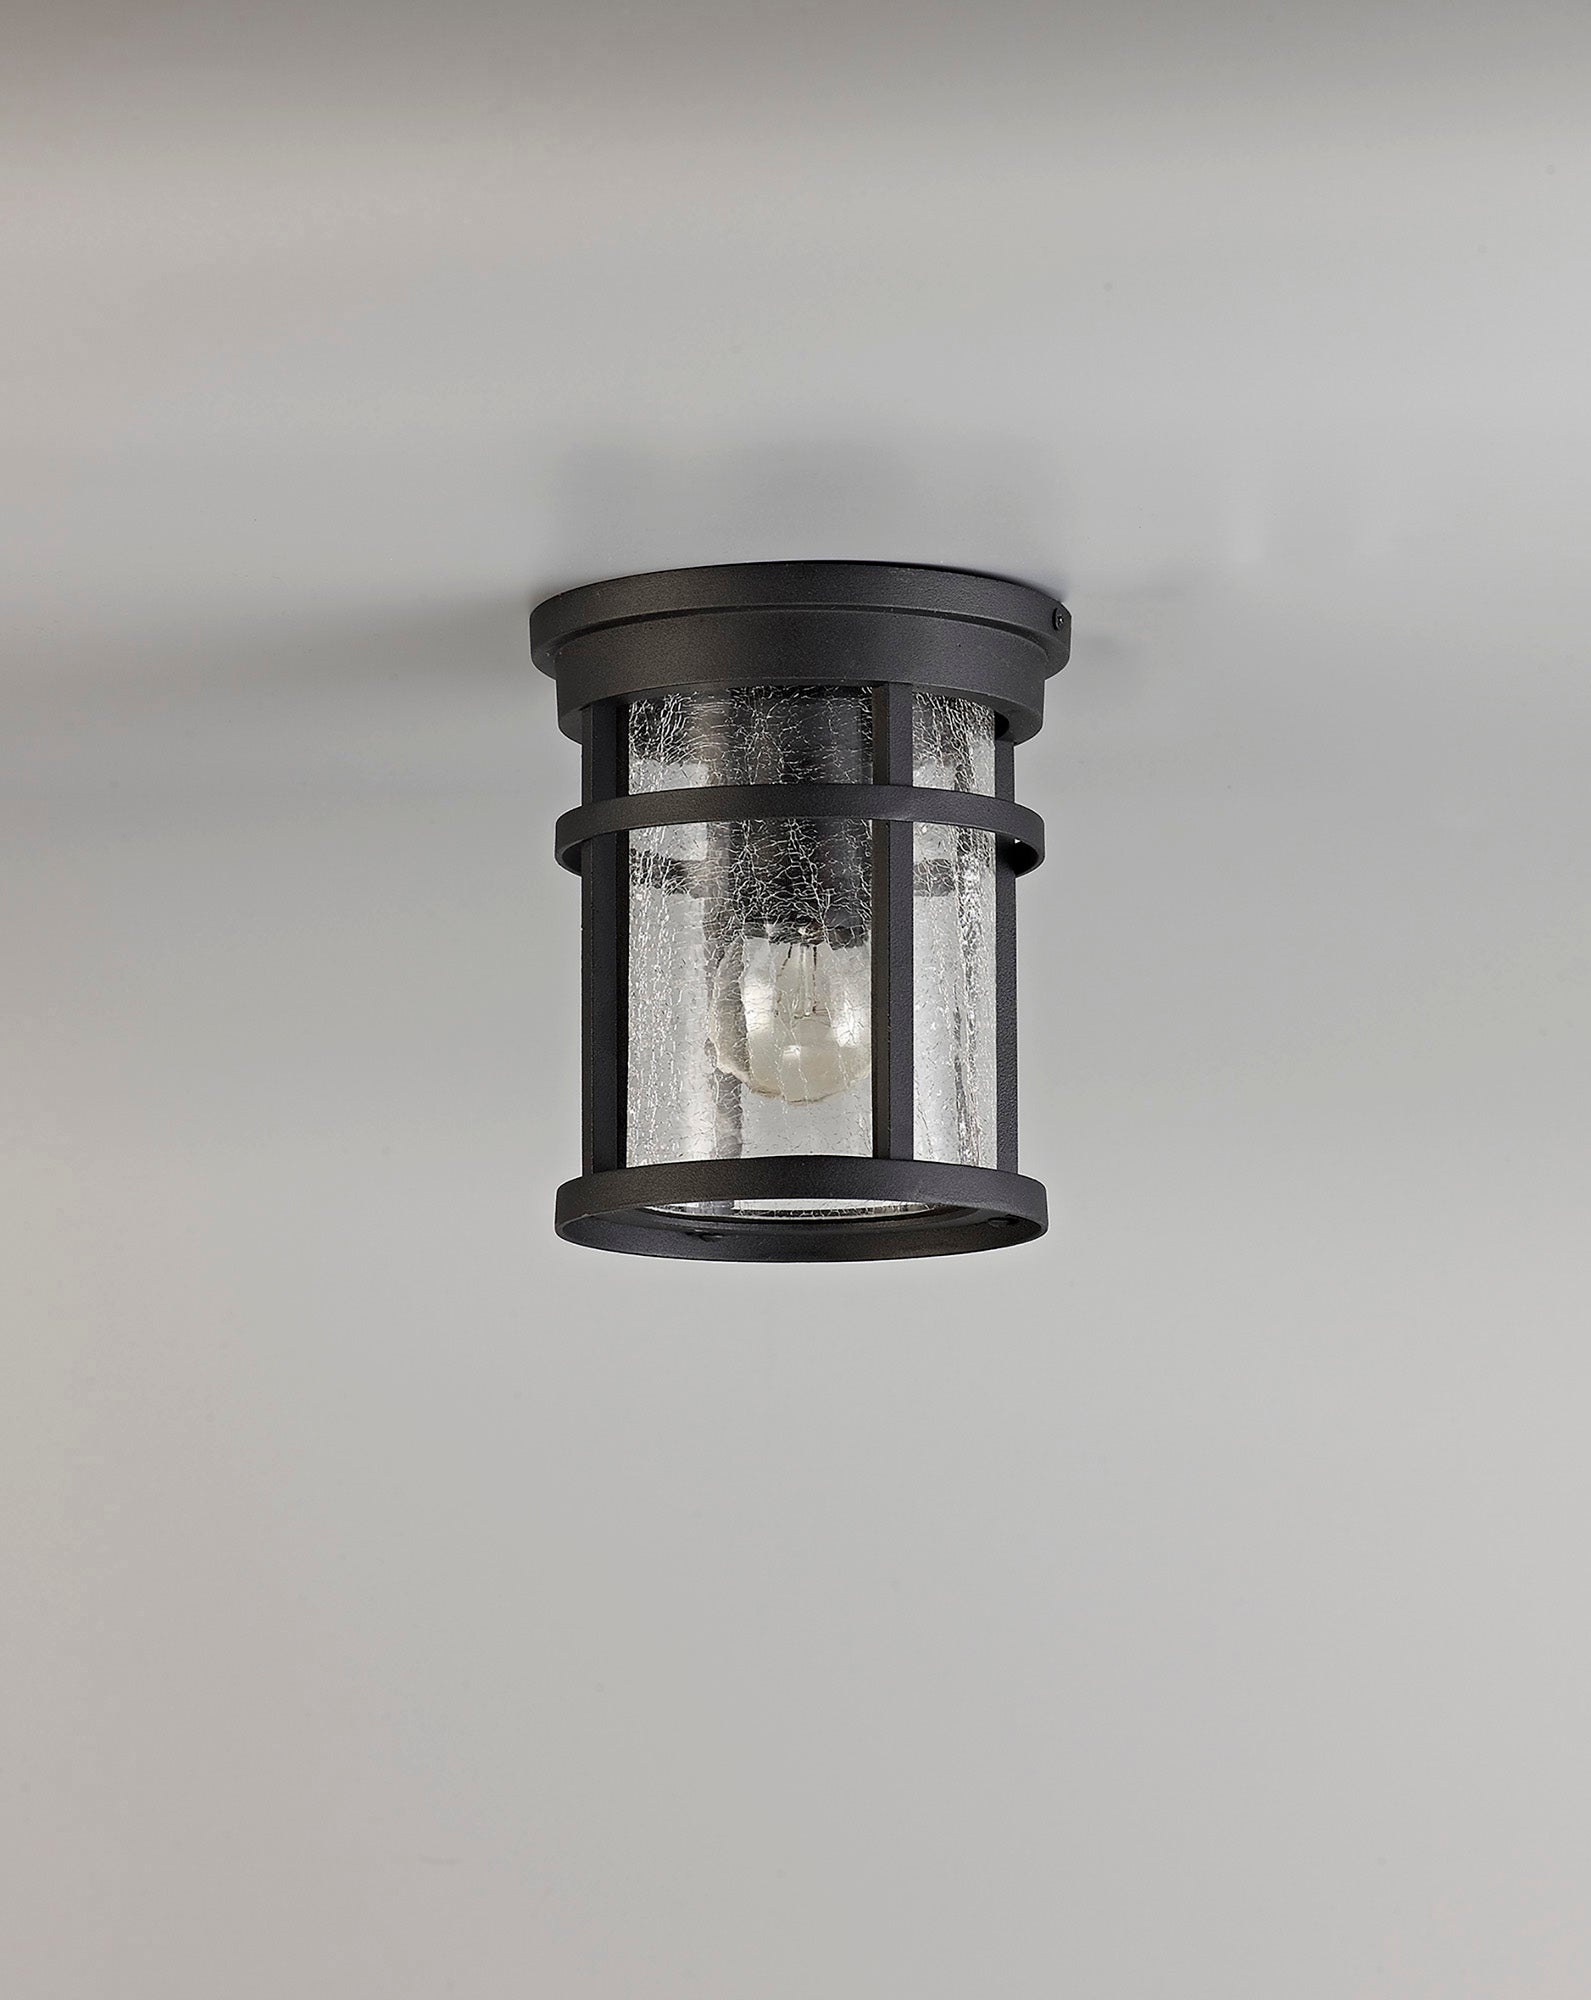 Elliot Outdoor Ceiling, 1 x E27, Black/Clear Crackled Glass, IP54, 2yrs Warranty LO173193